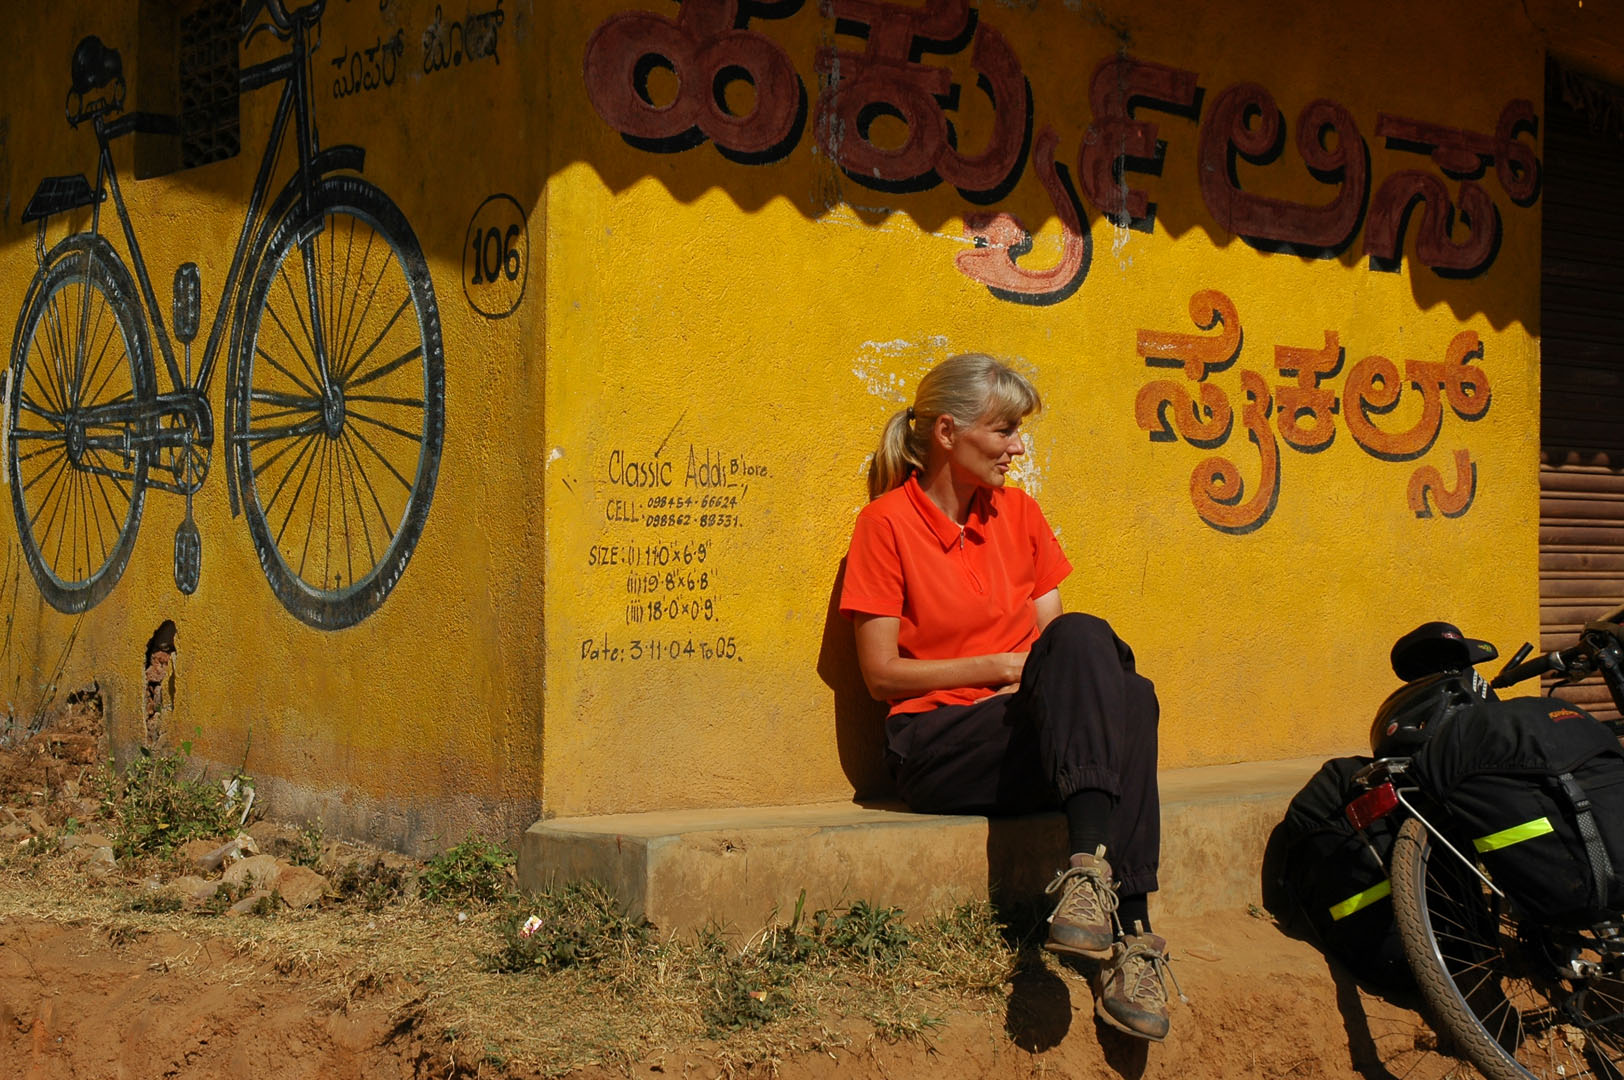 A western cyclist leans against a building with an Indian bicycle painted on it during a bicycle tour of South India.